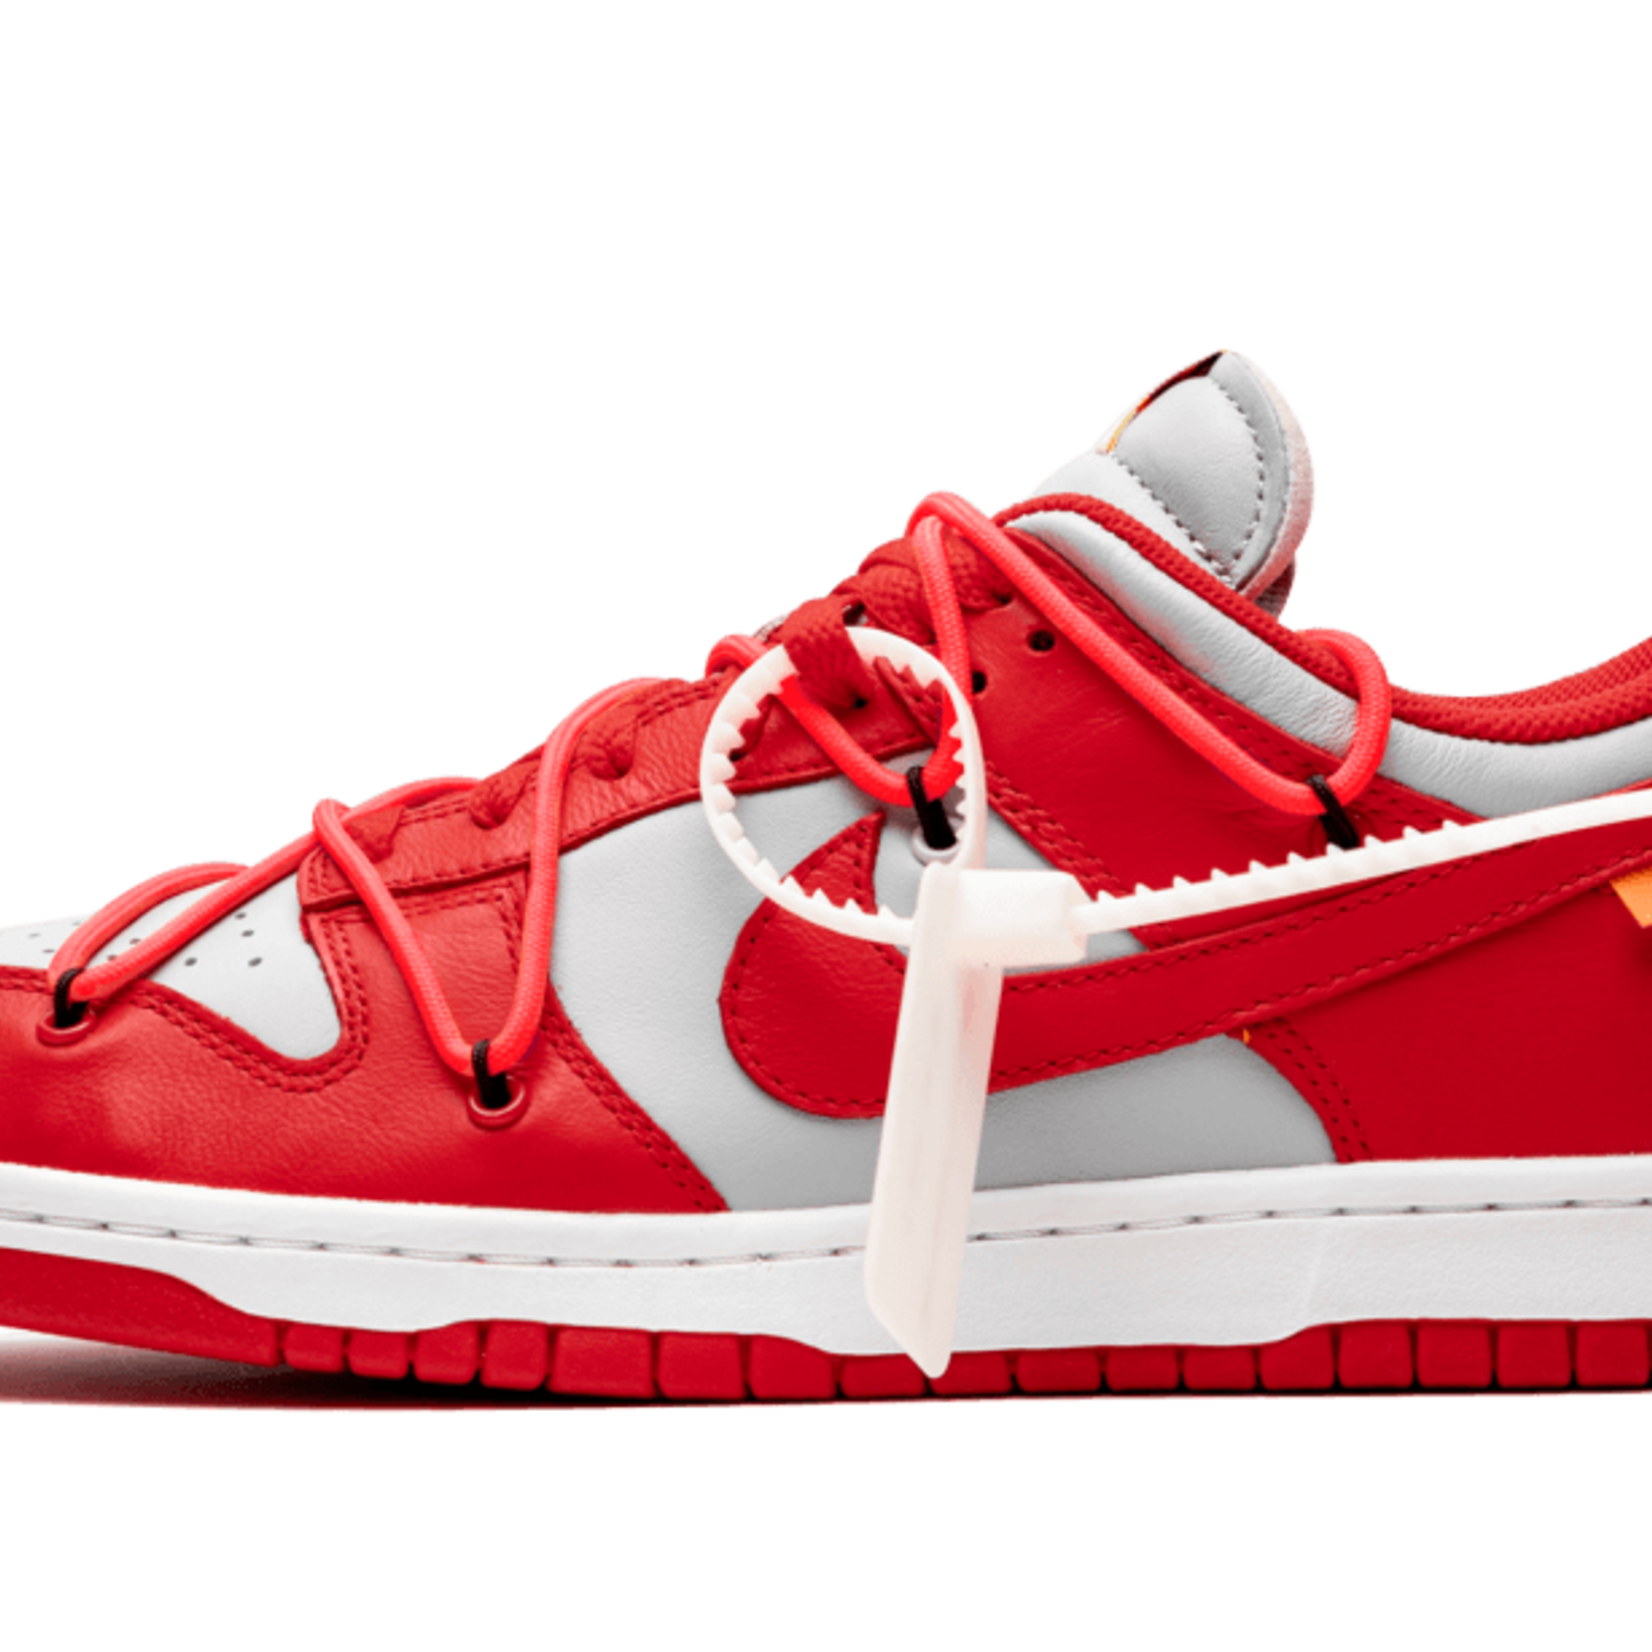 Nike Dunk Low  “Off-White - University Red”